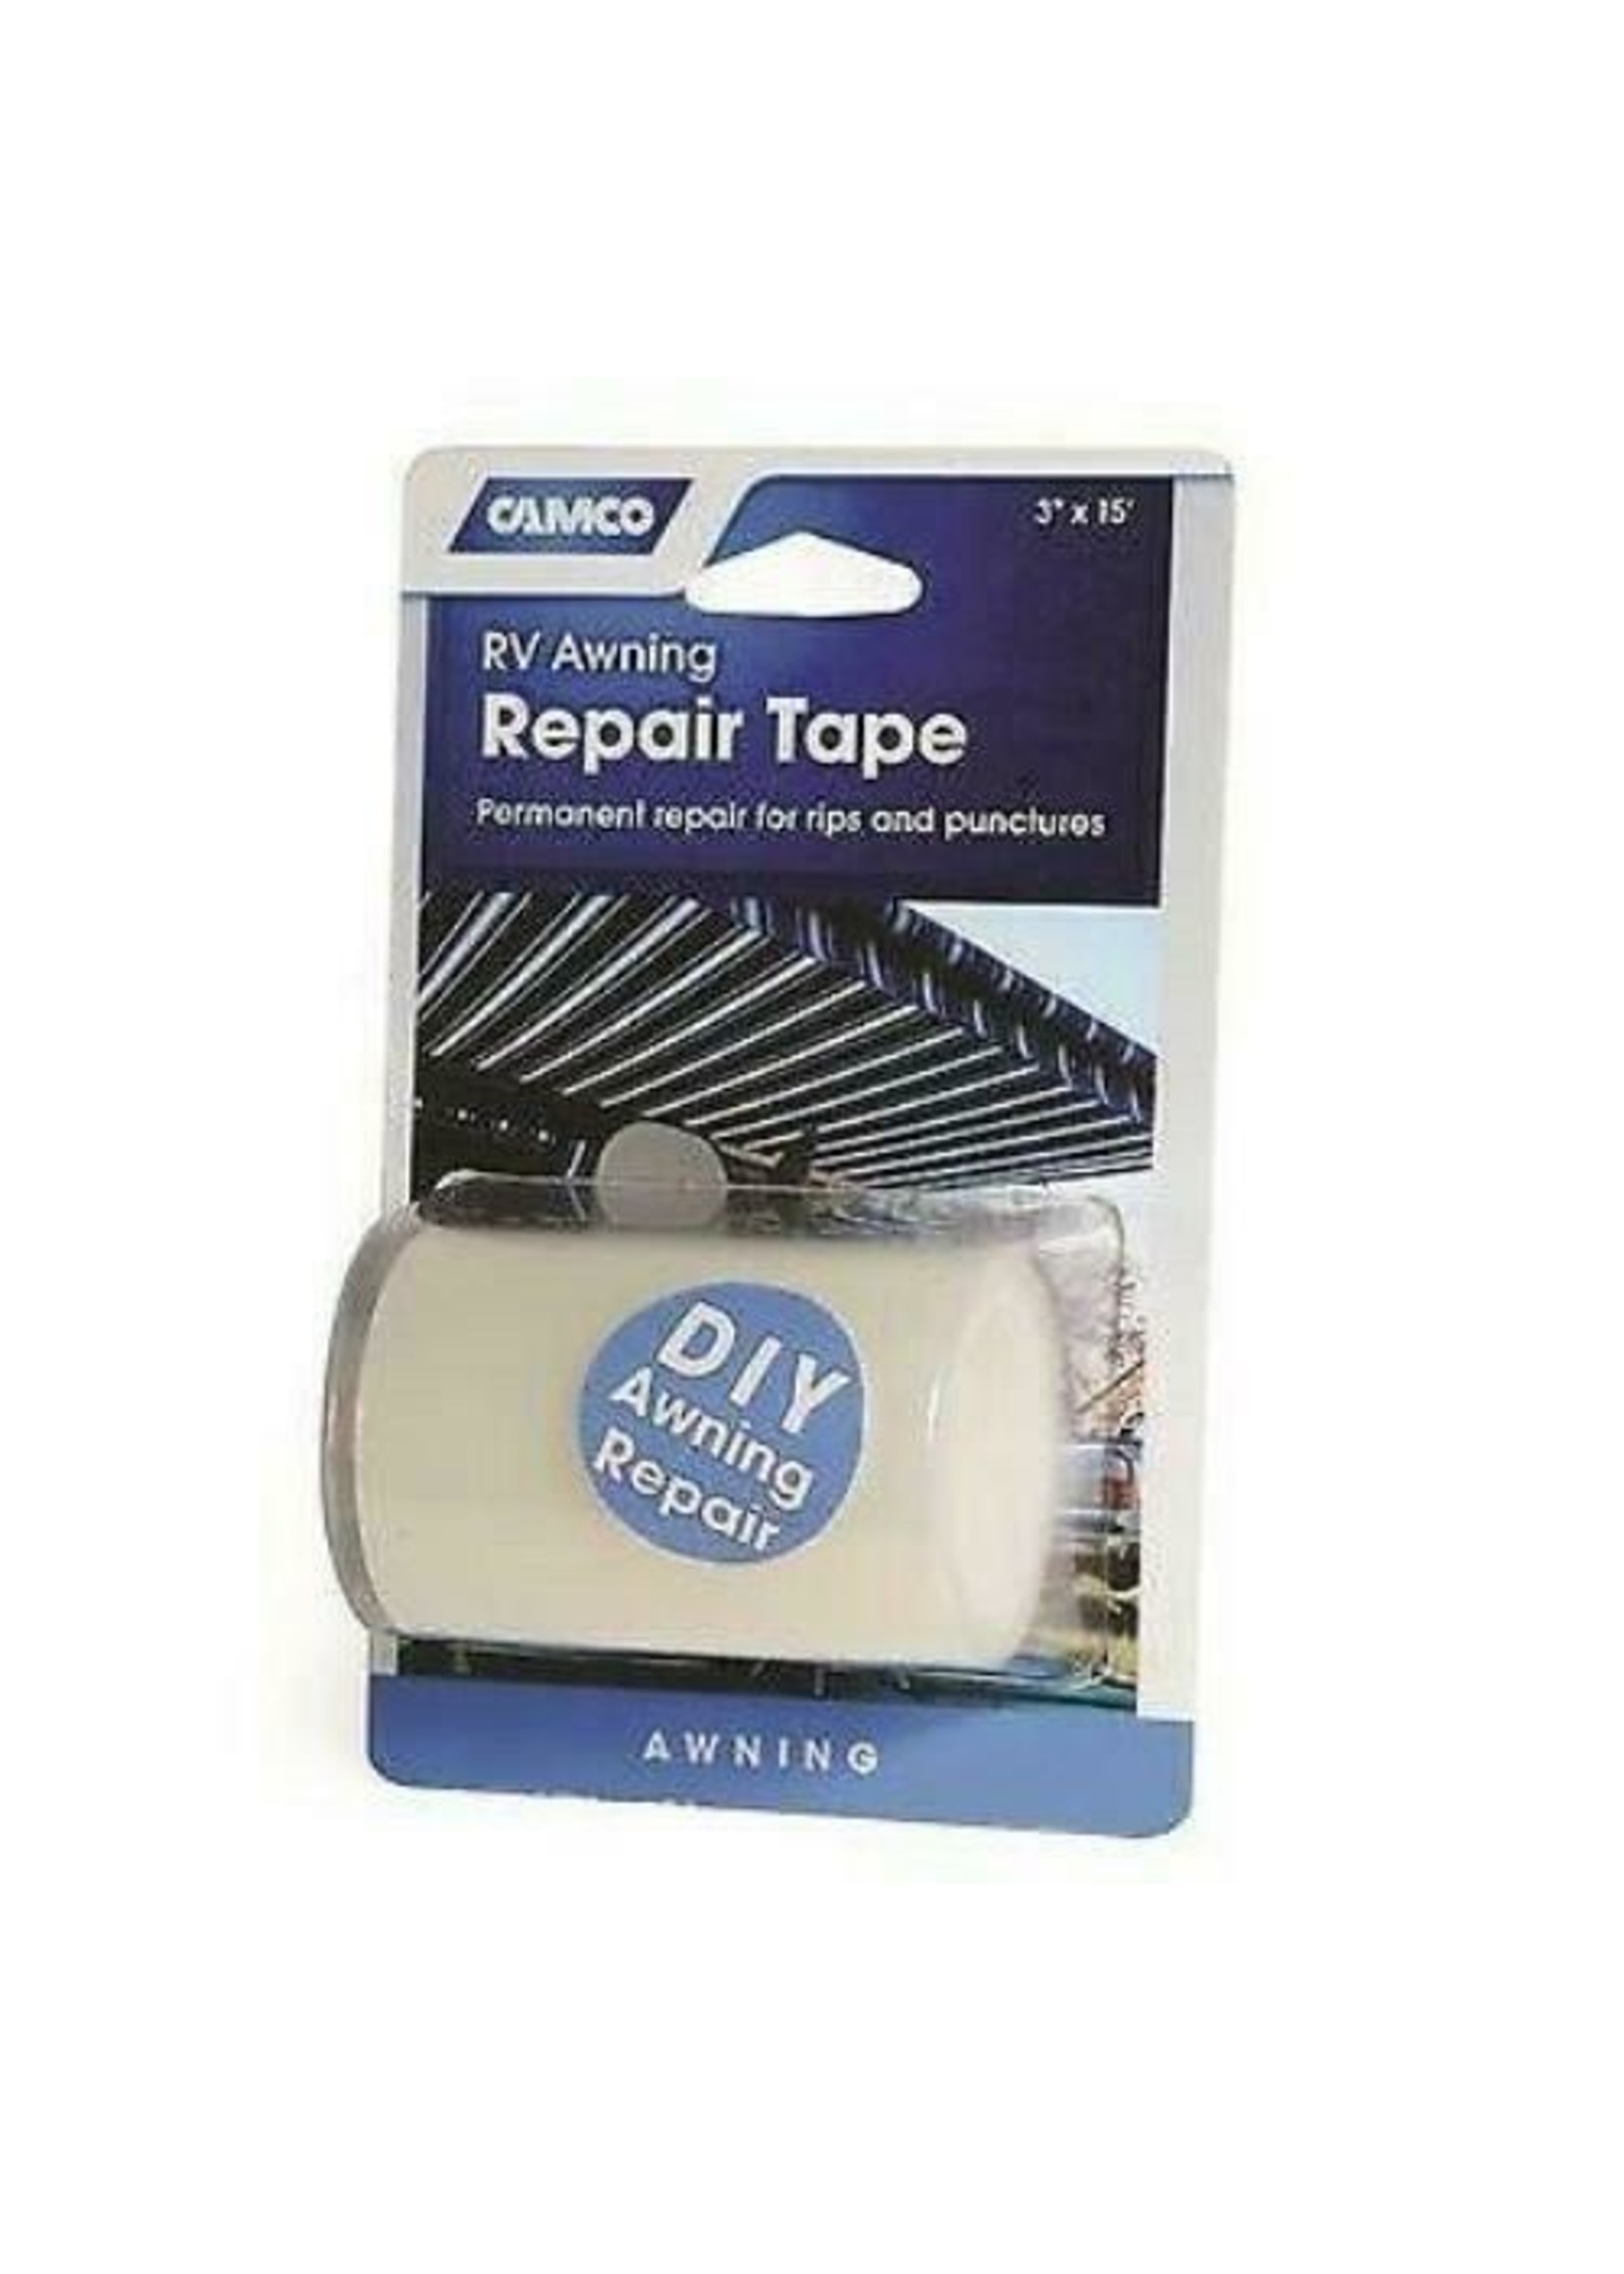 CAMCO CAMCO RV AWNING REPAIR TAPE - 3'" WIDE x 15' LONG. 42613